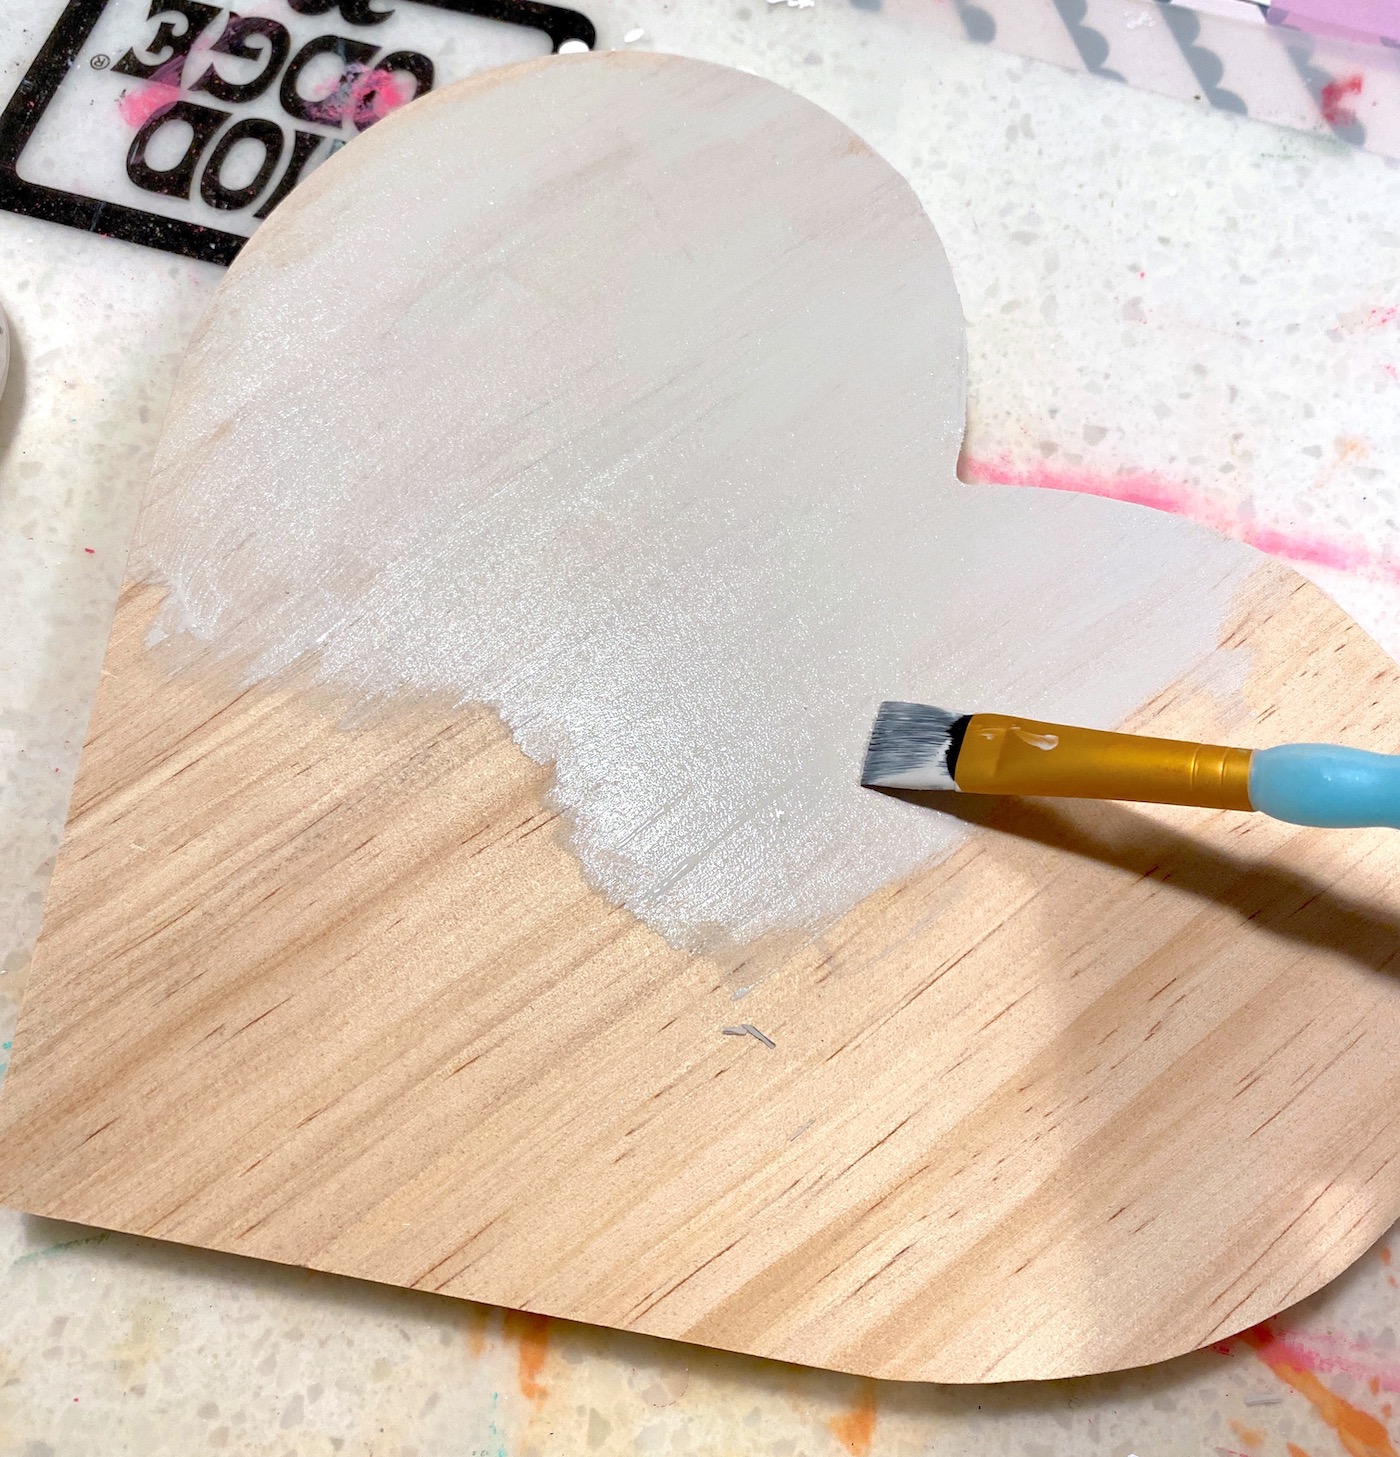 Painting the heart with light grayish brown paint